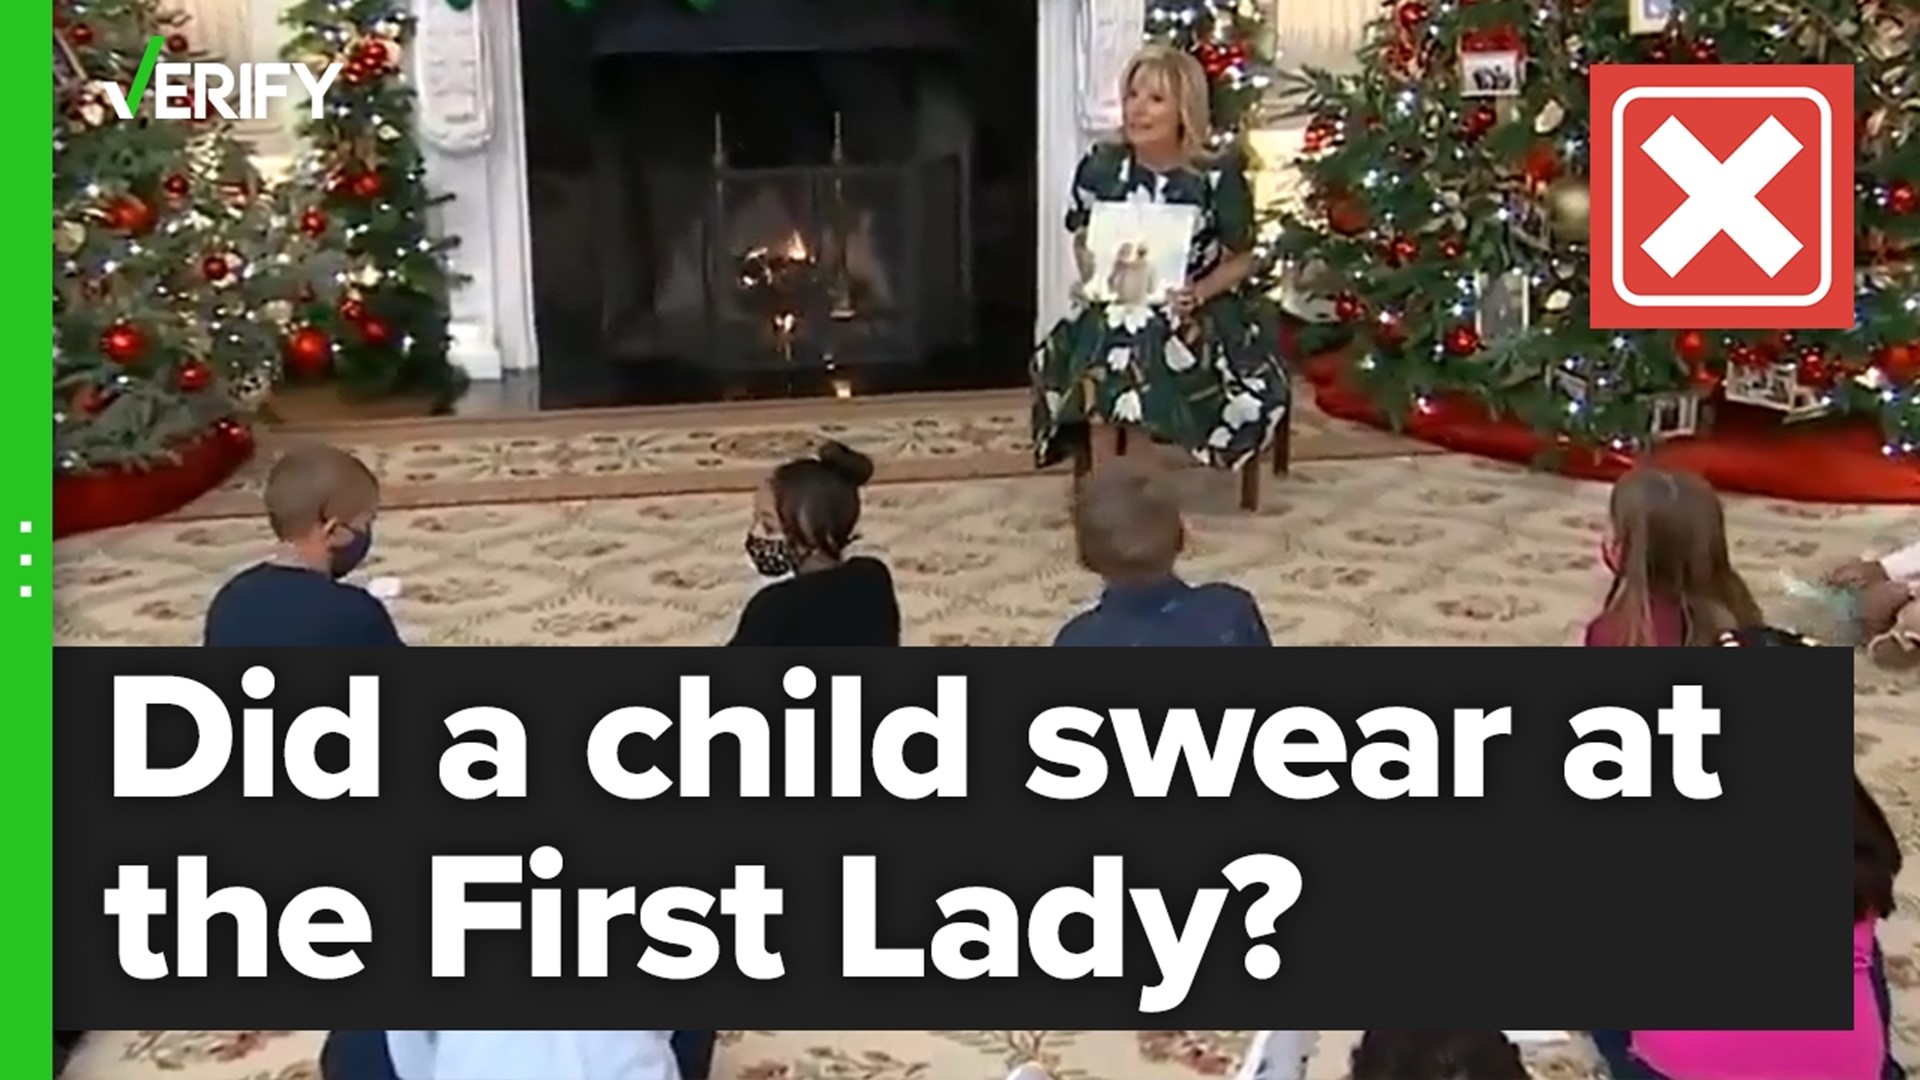 Did a child swear at the First Lady?? The VERIFY team confirms this is false.